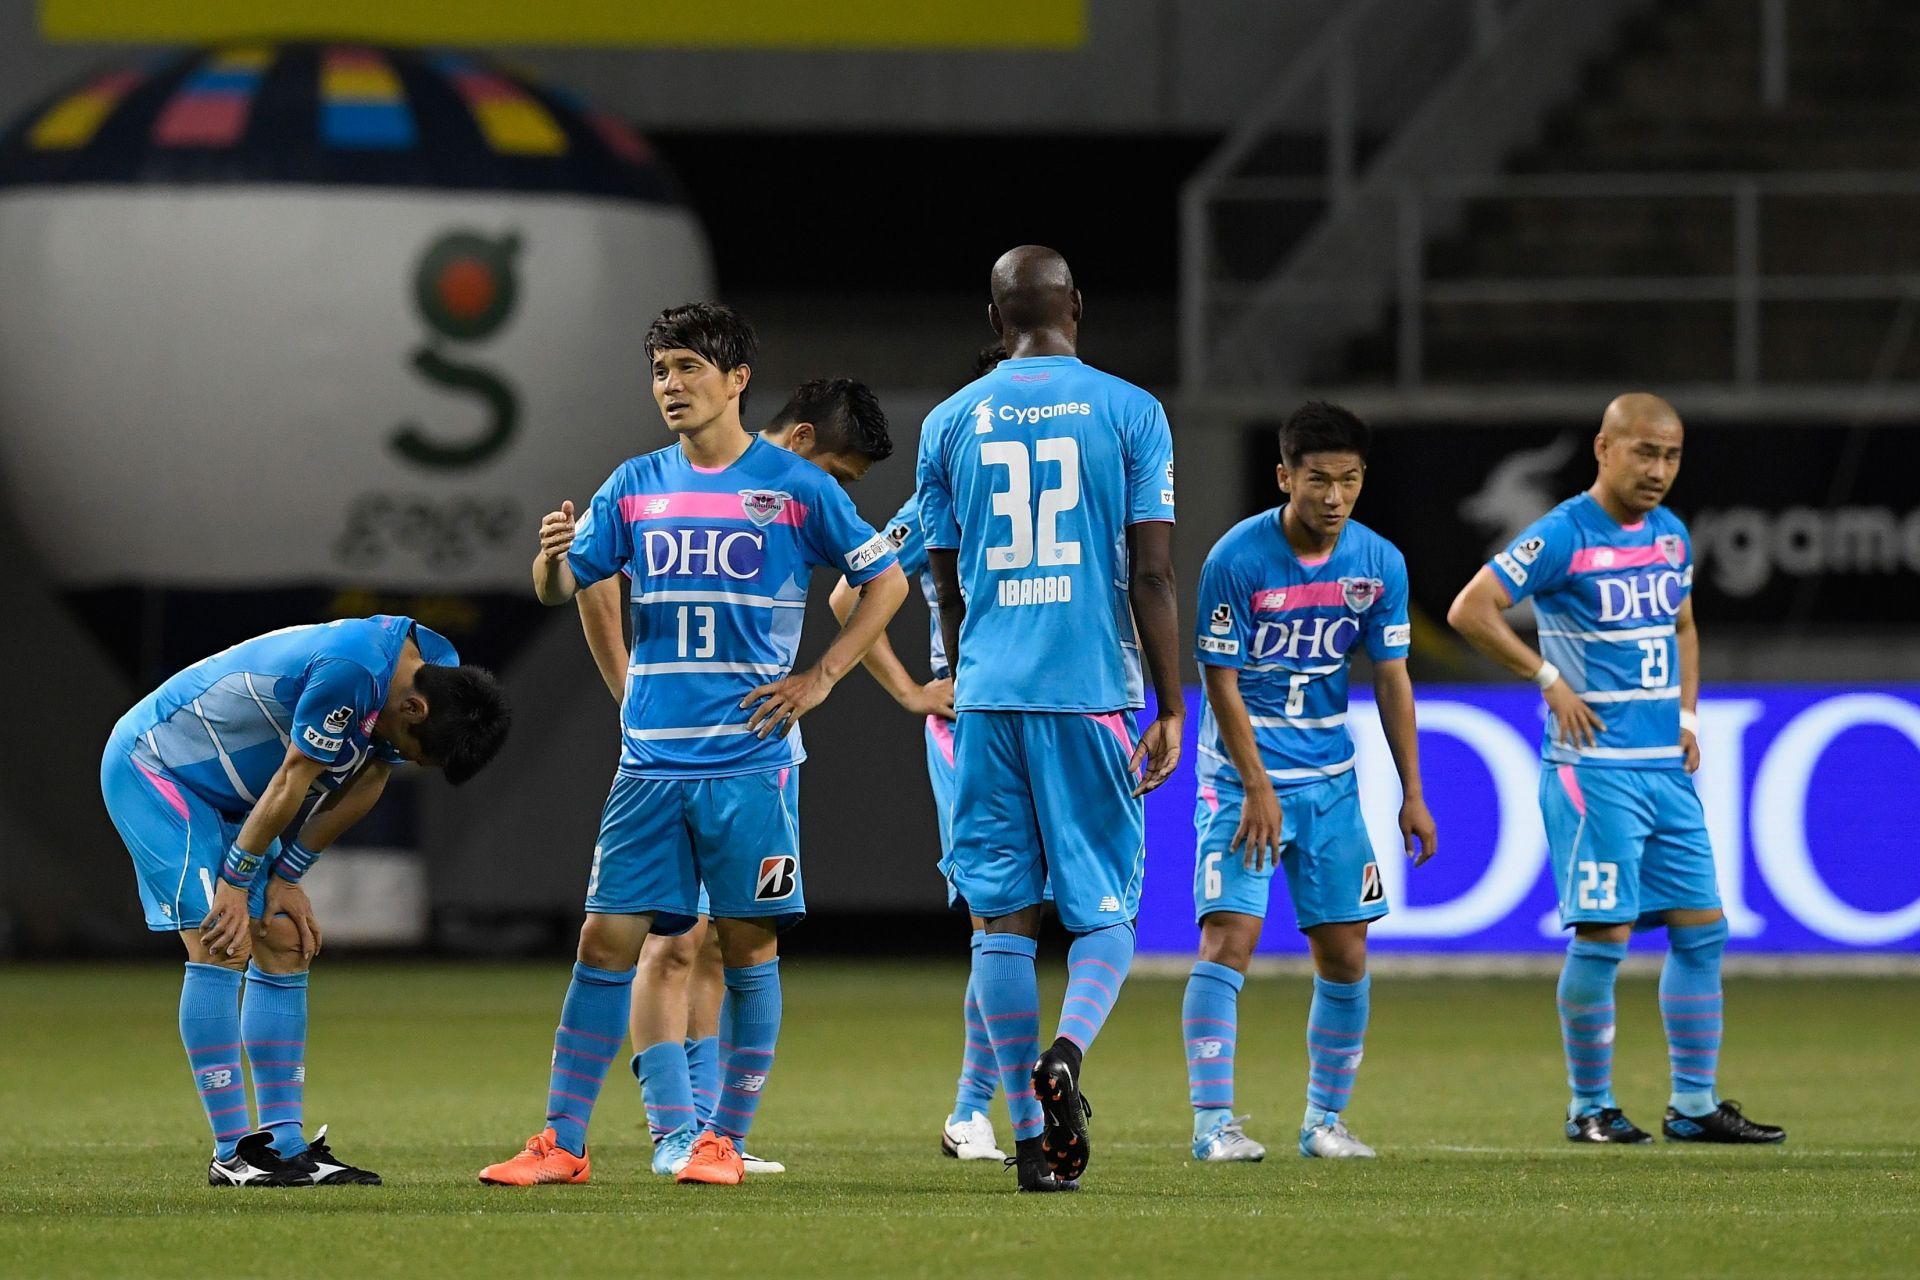 Sagan Tosu will be hoping to leapfrog their opponents with a win